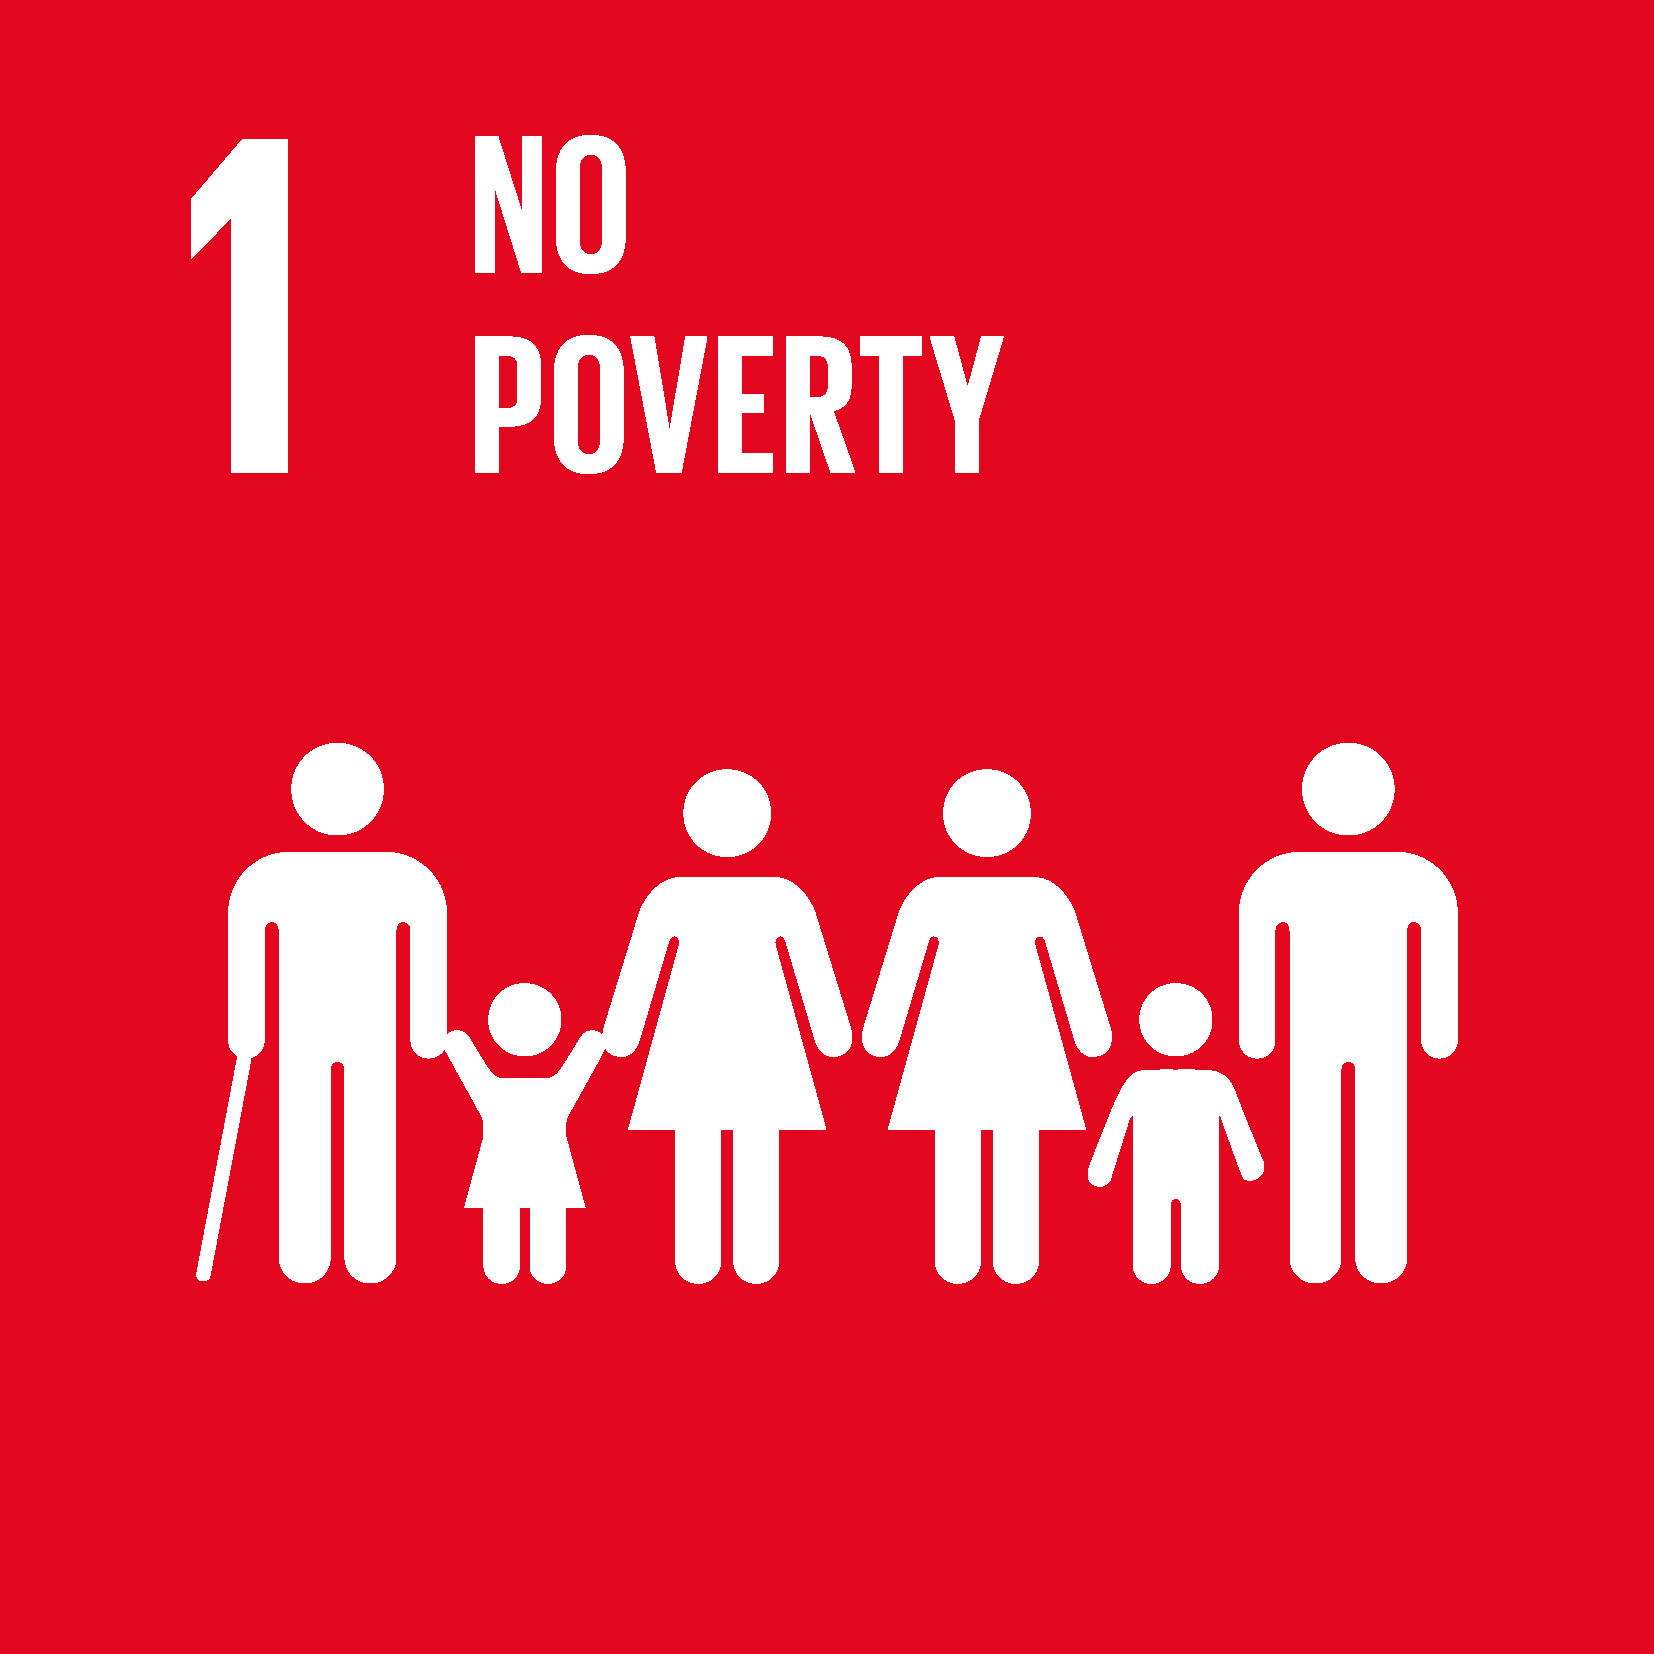 The Global Goal 1 No poverty